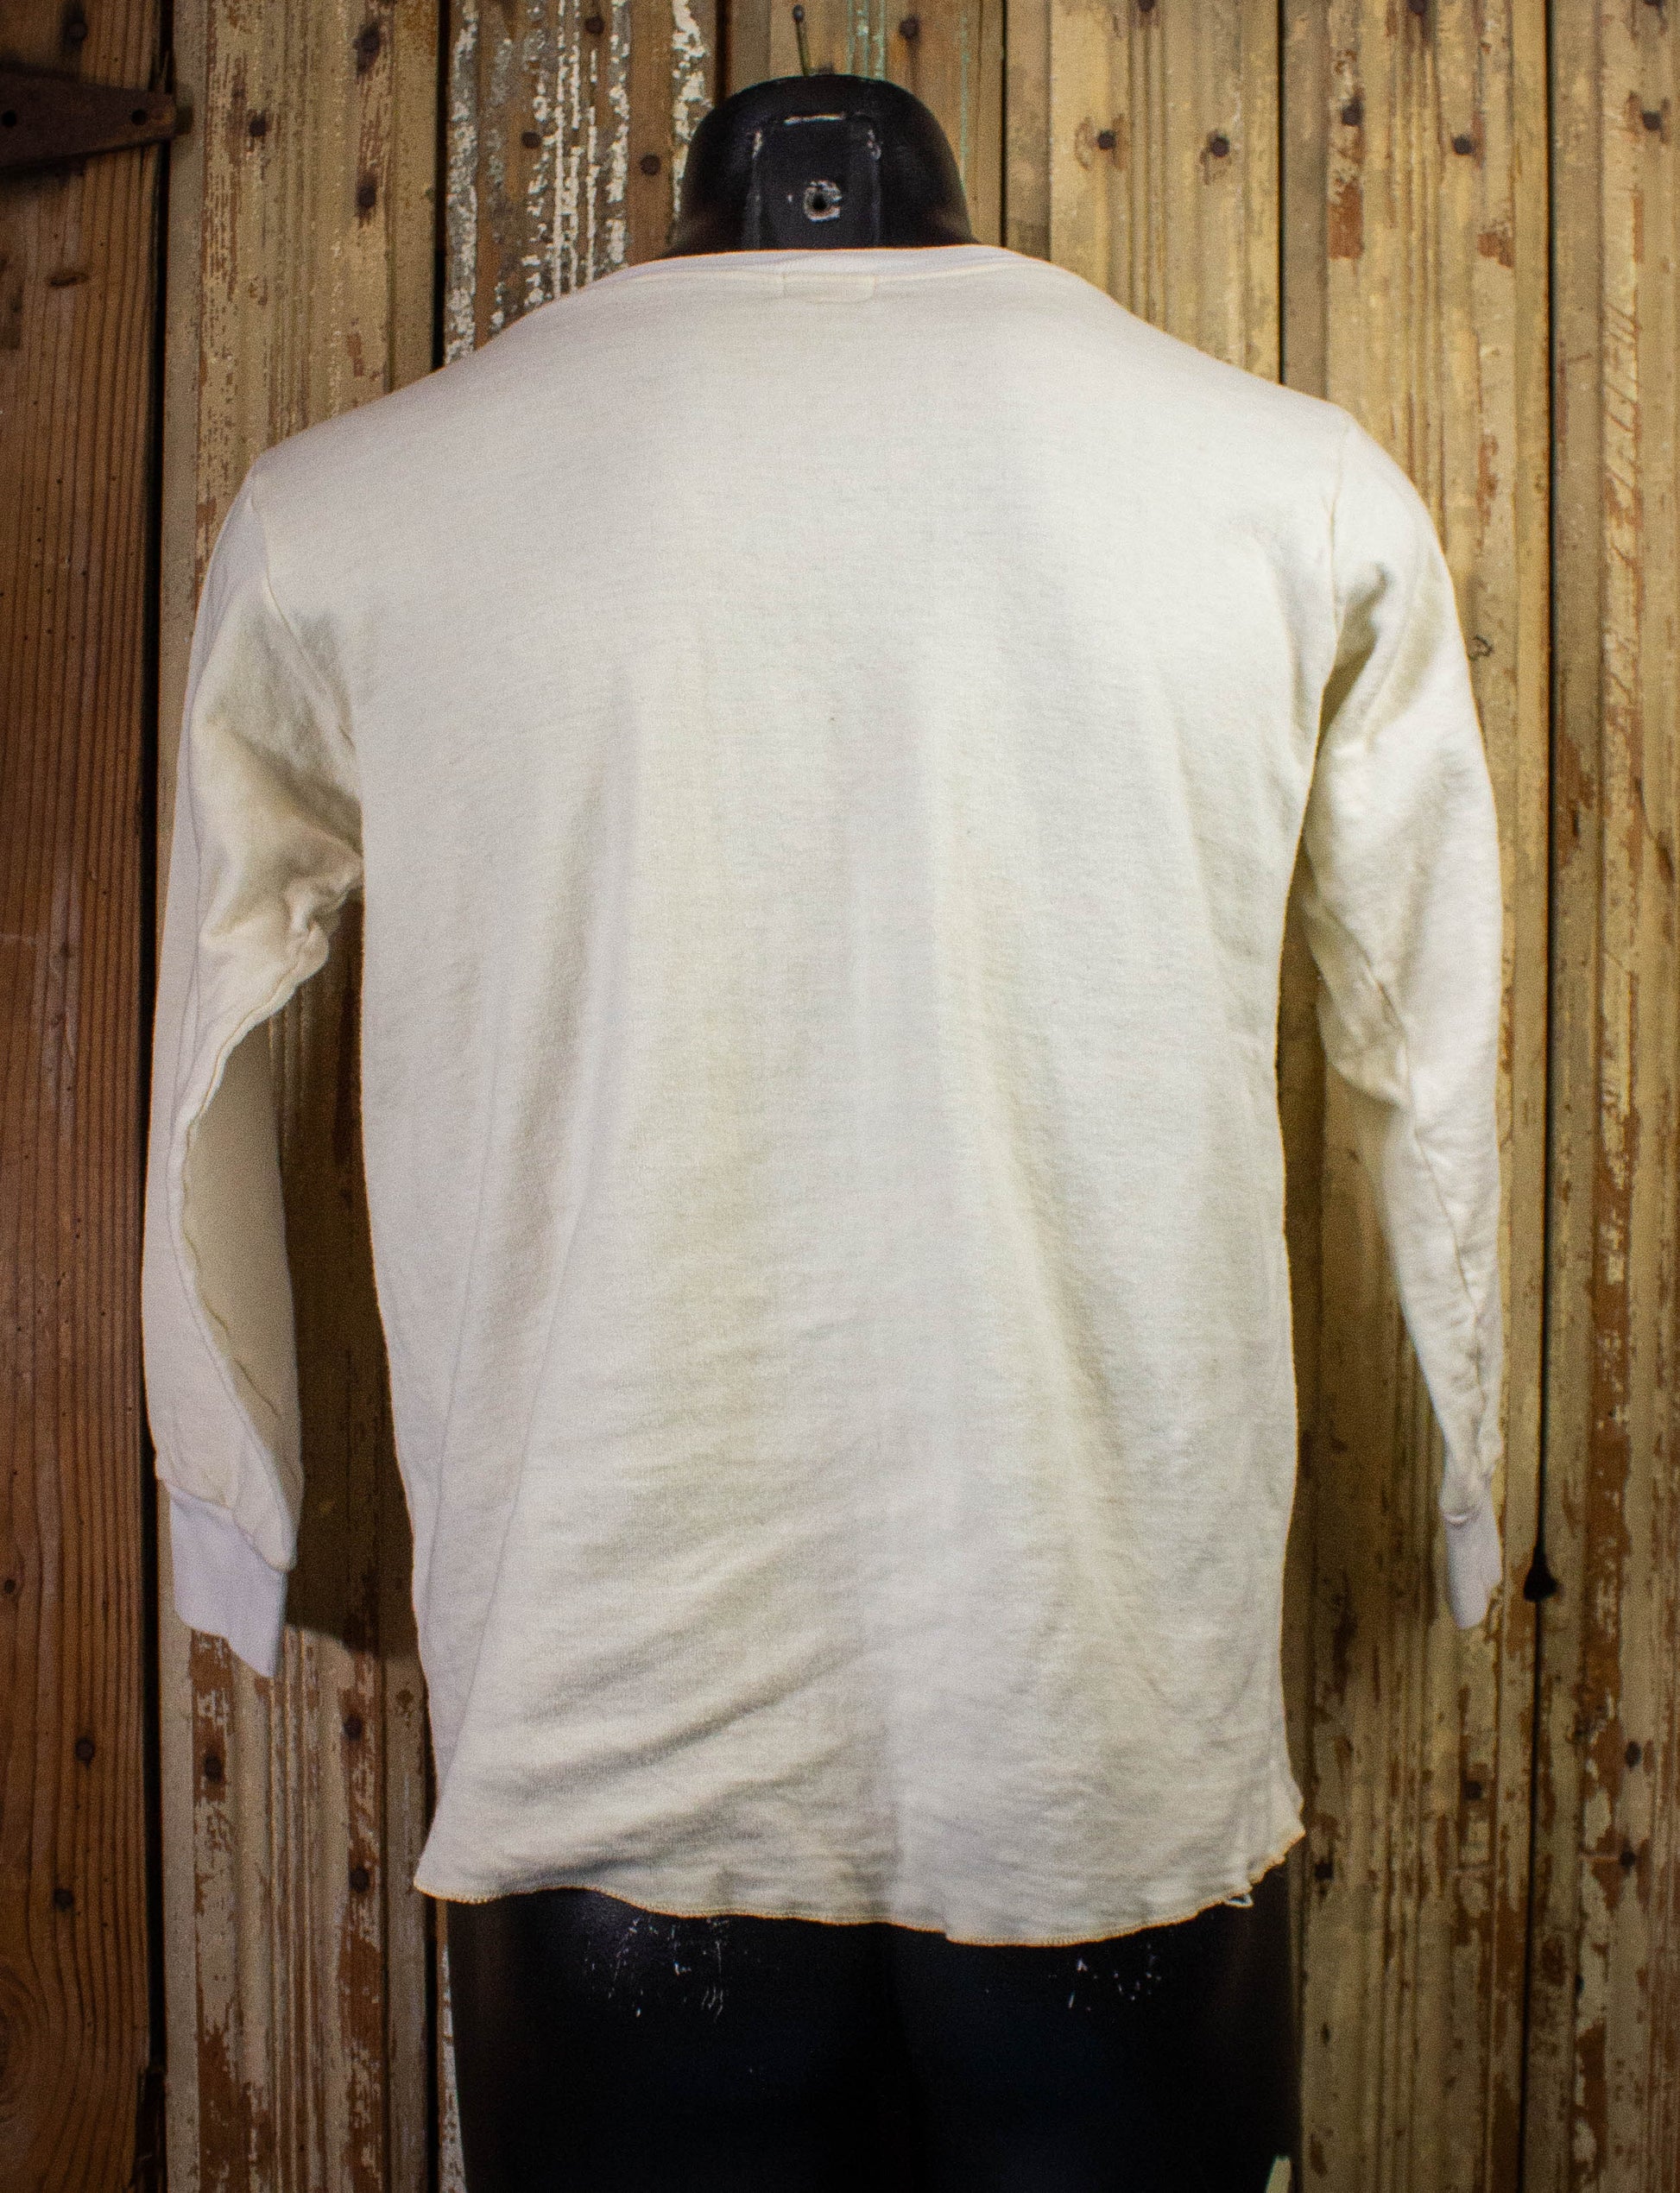 Vintage 60's/70's White Long Sleeve Thermal Shirt Women's Size XS